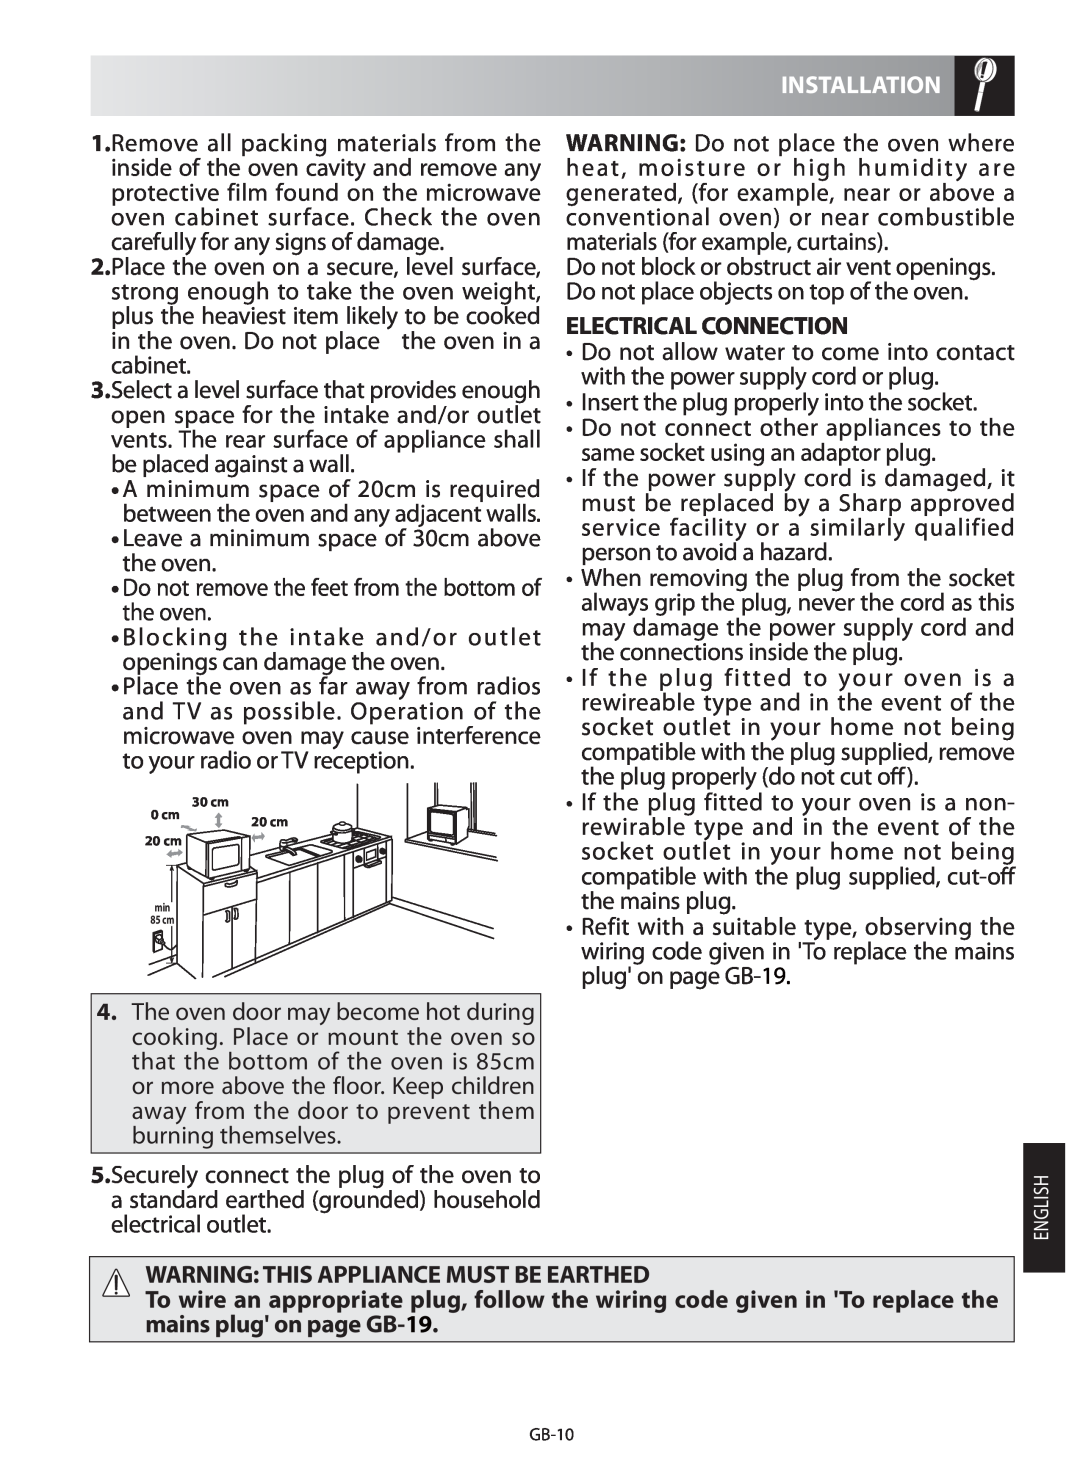 Sharp R-982STM operation manual Installation, Electrical Connection, Warning This Appliance Must Be Earthed 